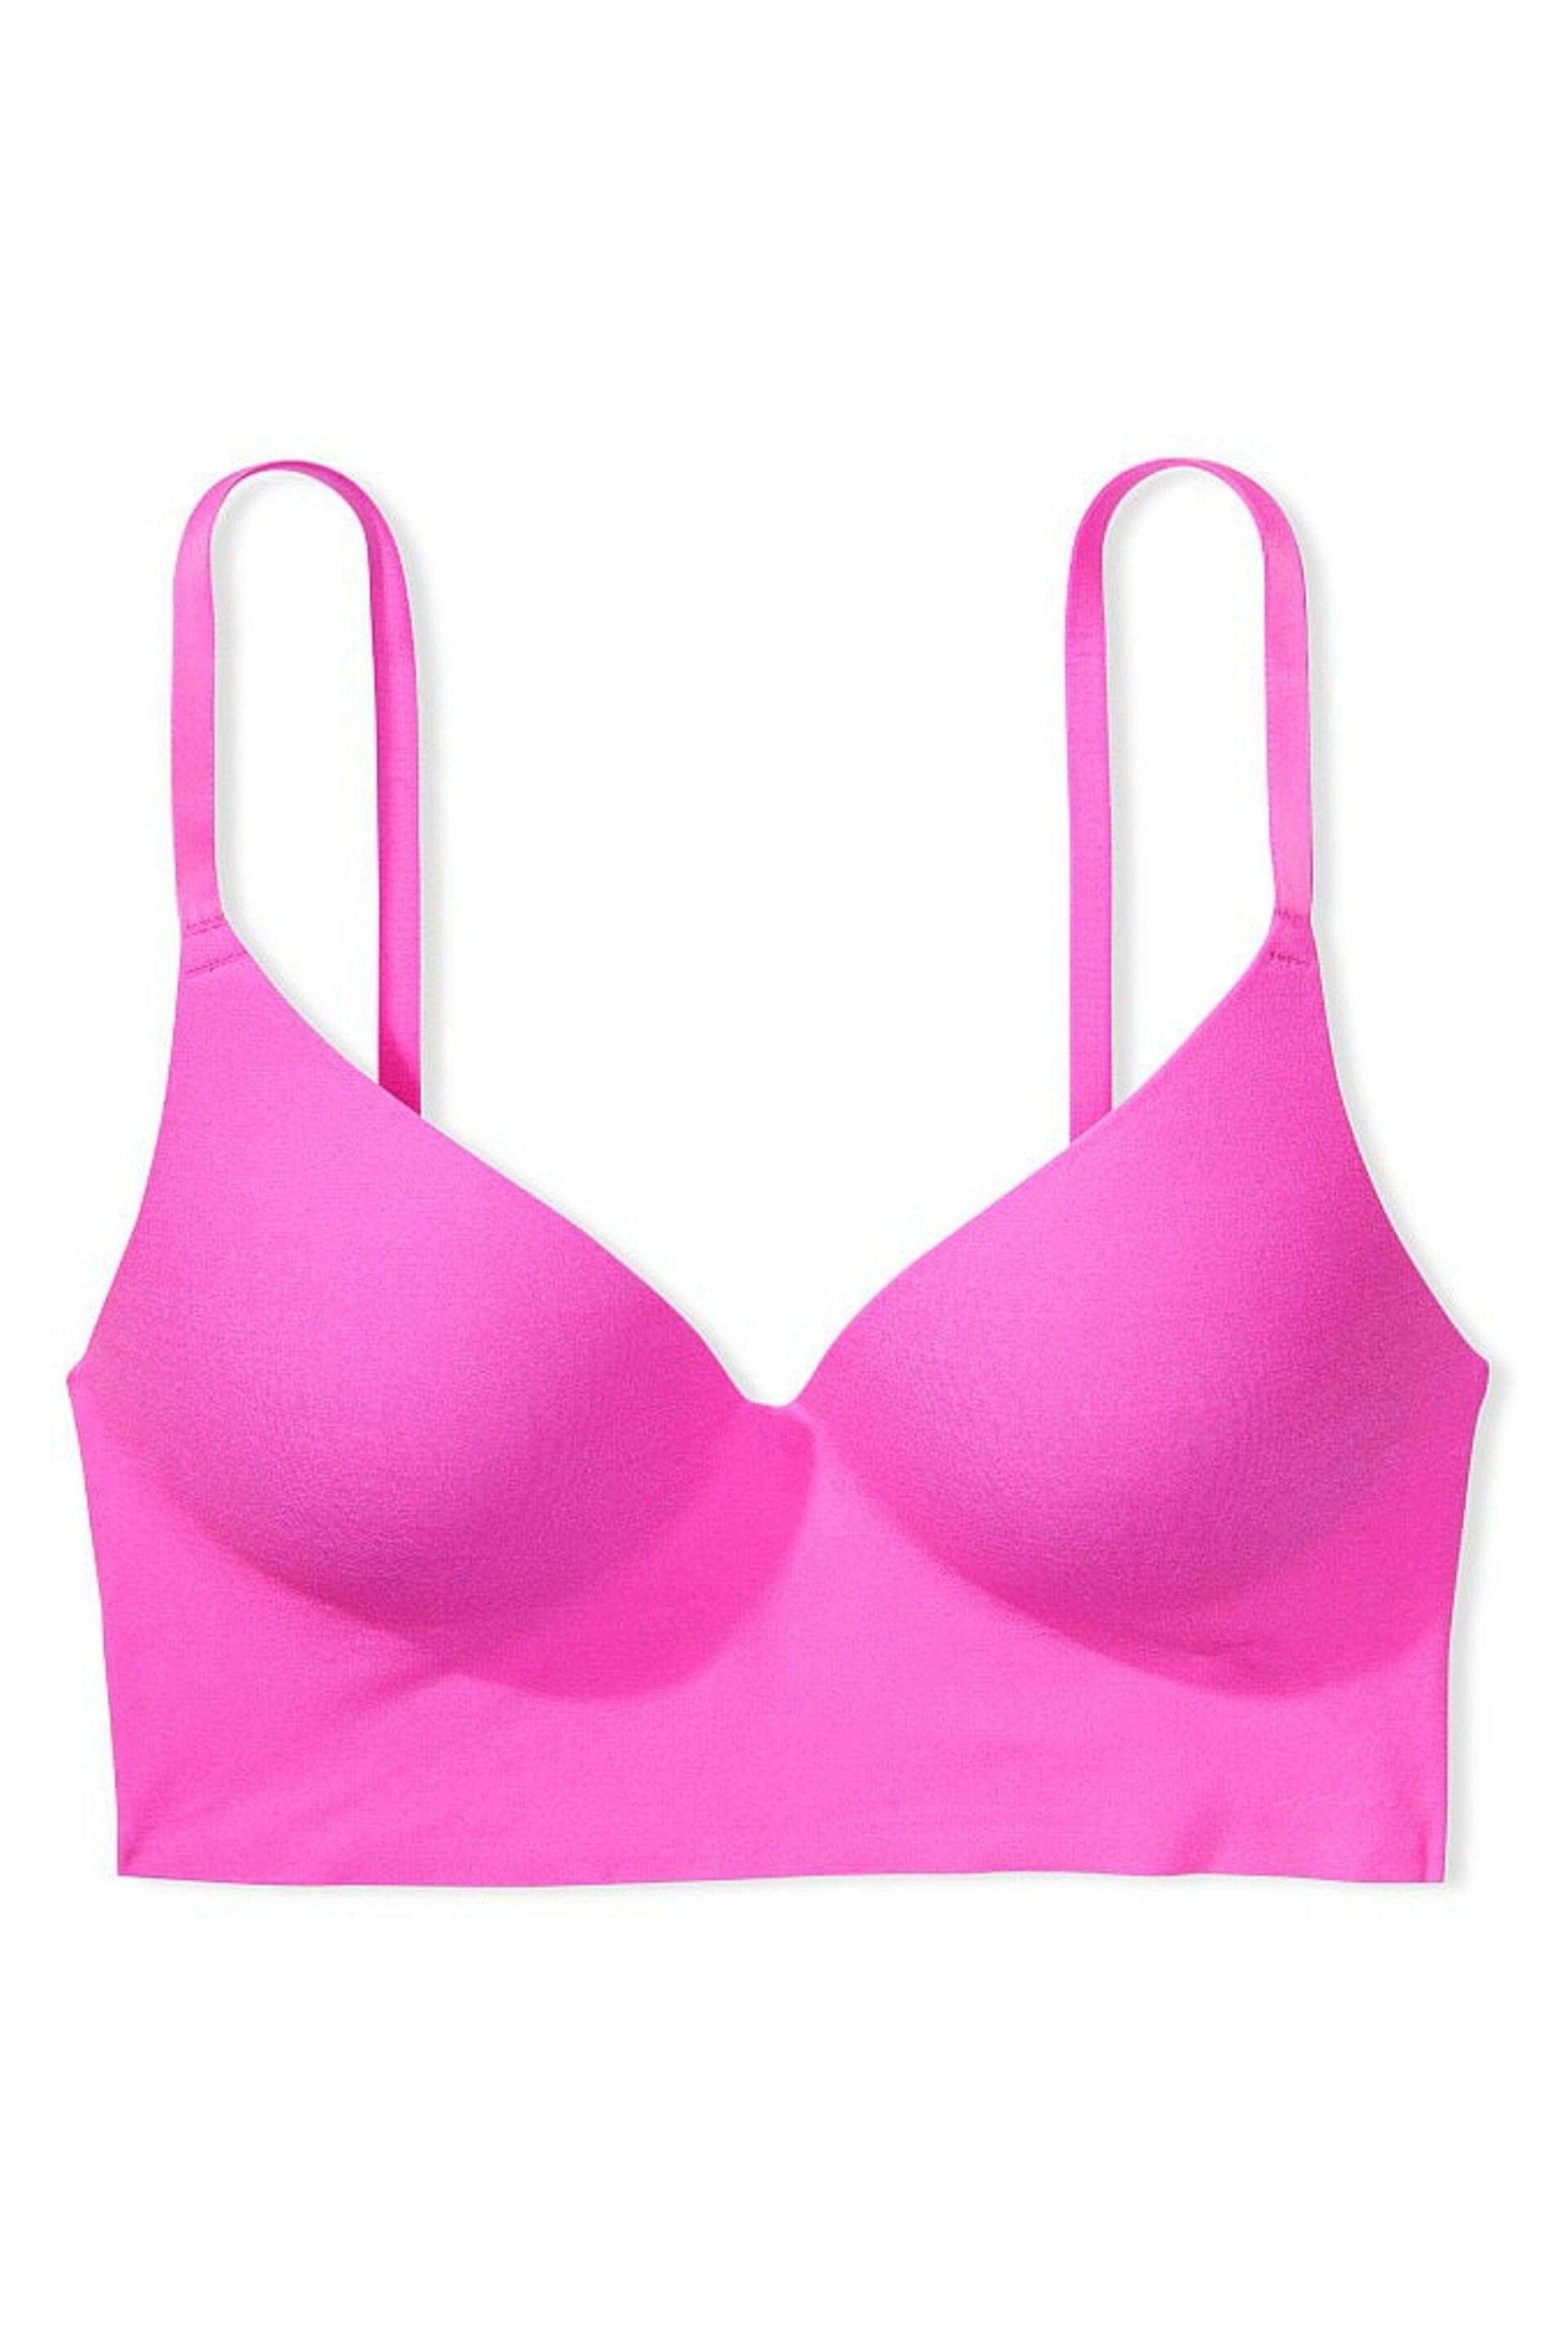 Victoria's Secret PINK Pink Berry Smooth Non Wired Push Up Bralette - Image 3 of 3